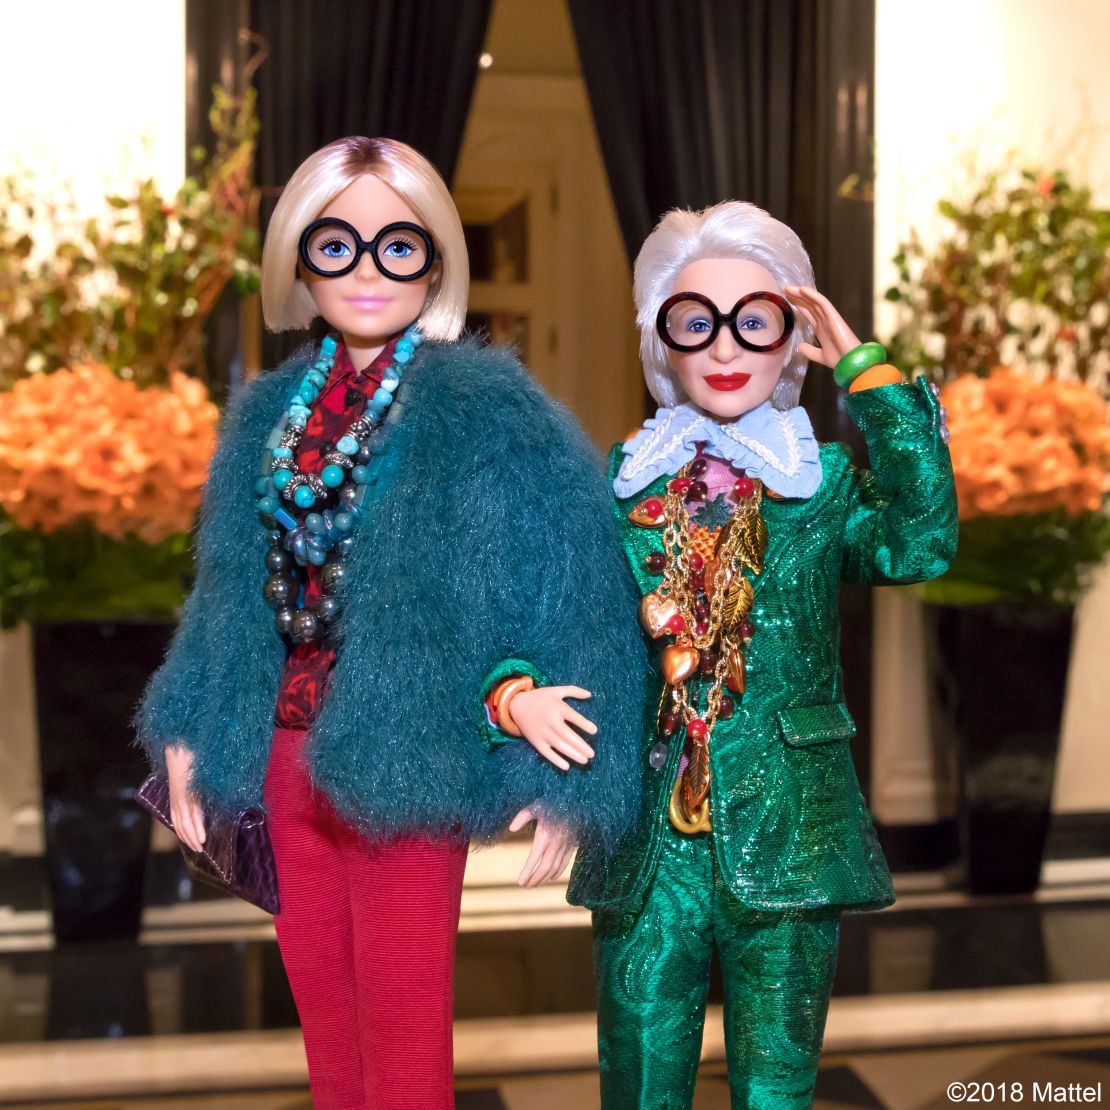 The Iris Apfel doll, complete with black-rimmed glasses.